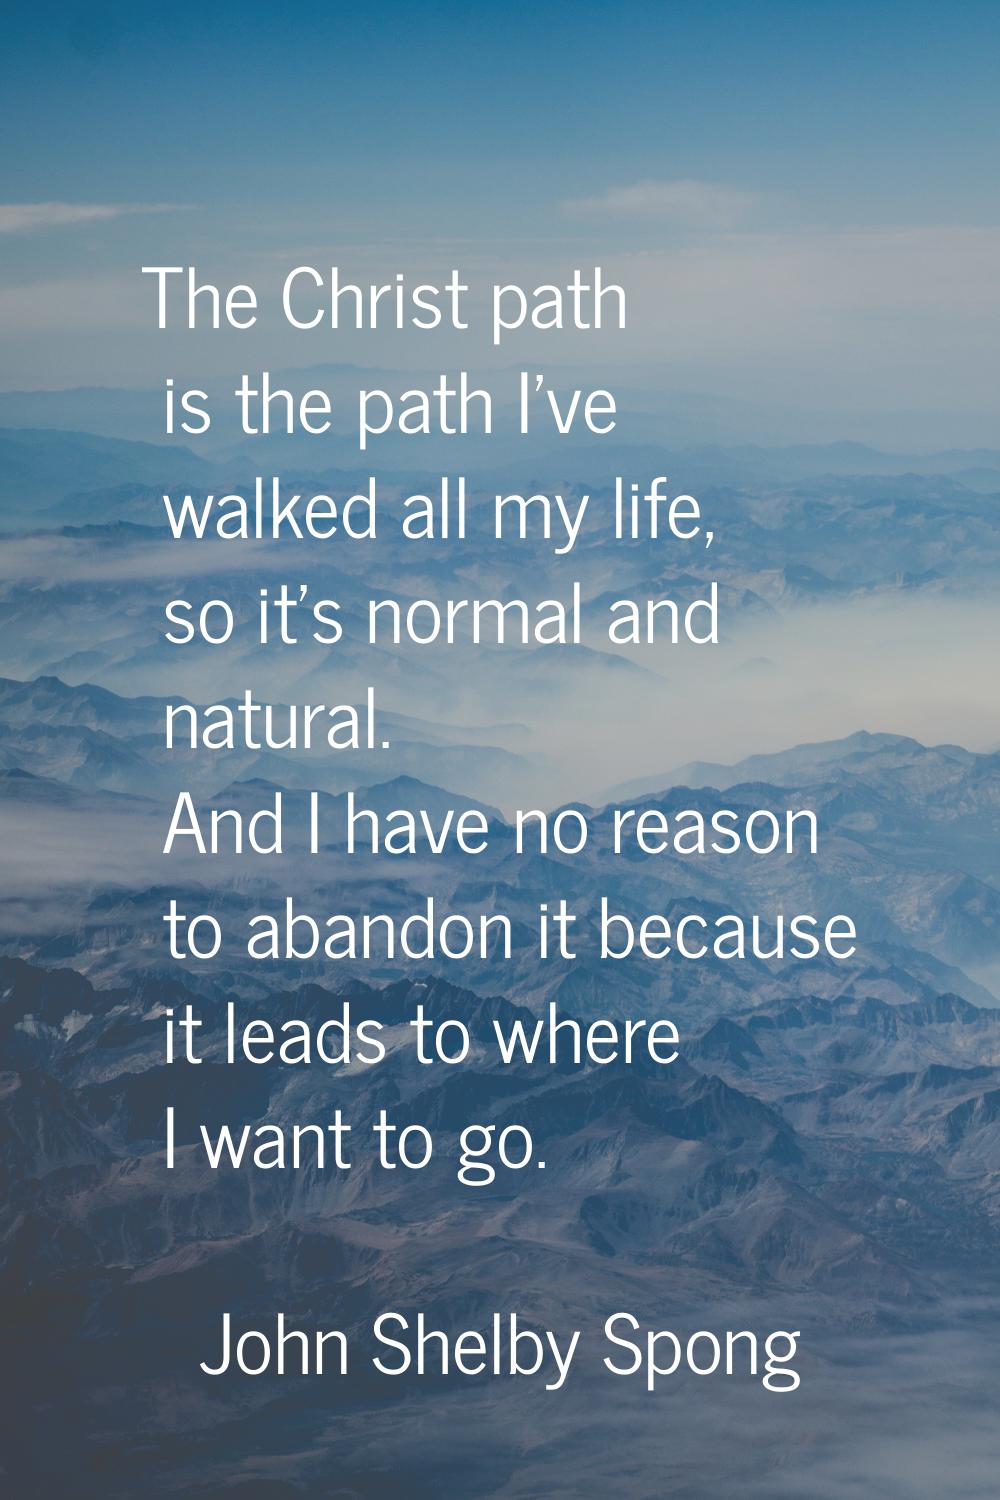 The Christ path is the path I've walked all my life, so it's normal and natural. And I have no reas